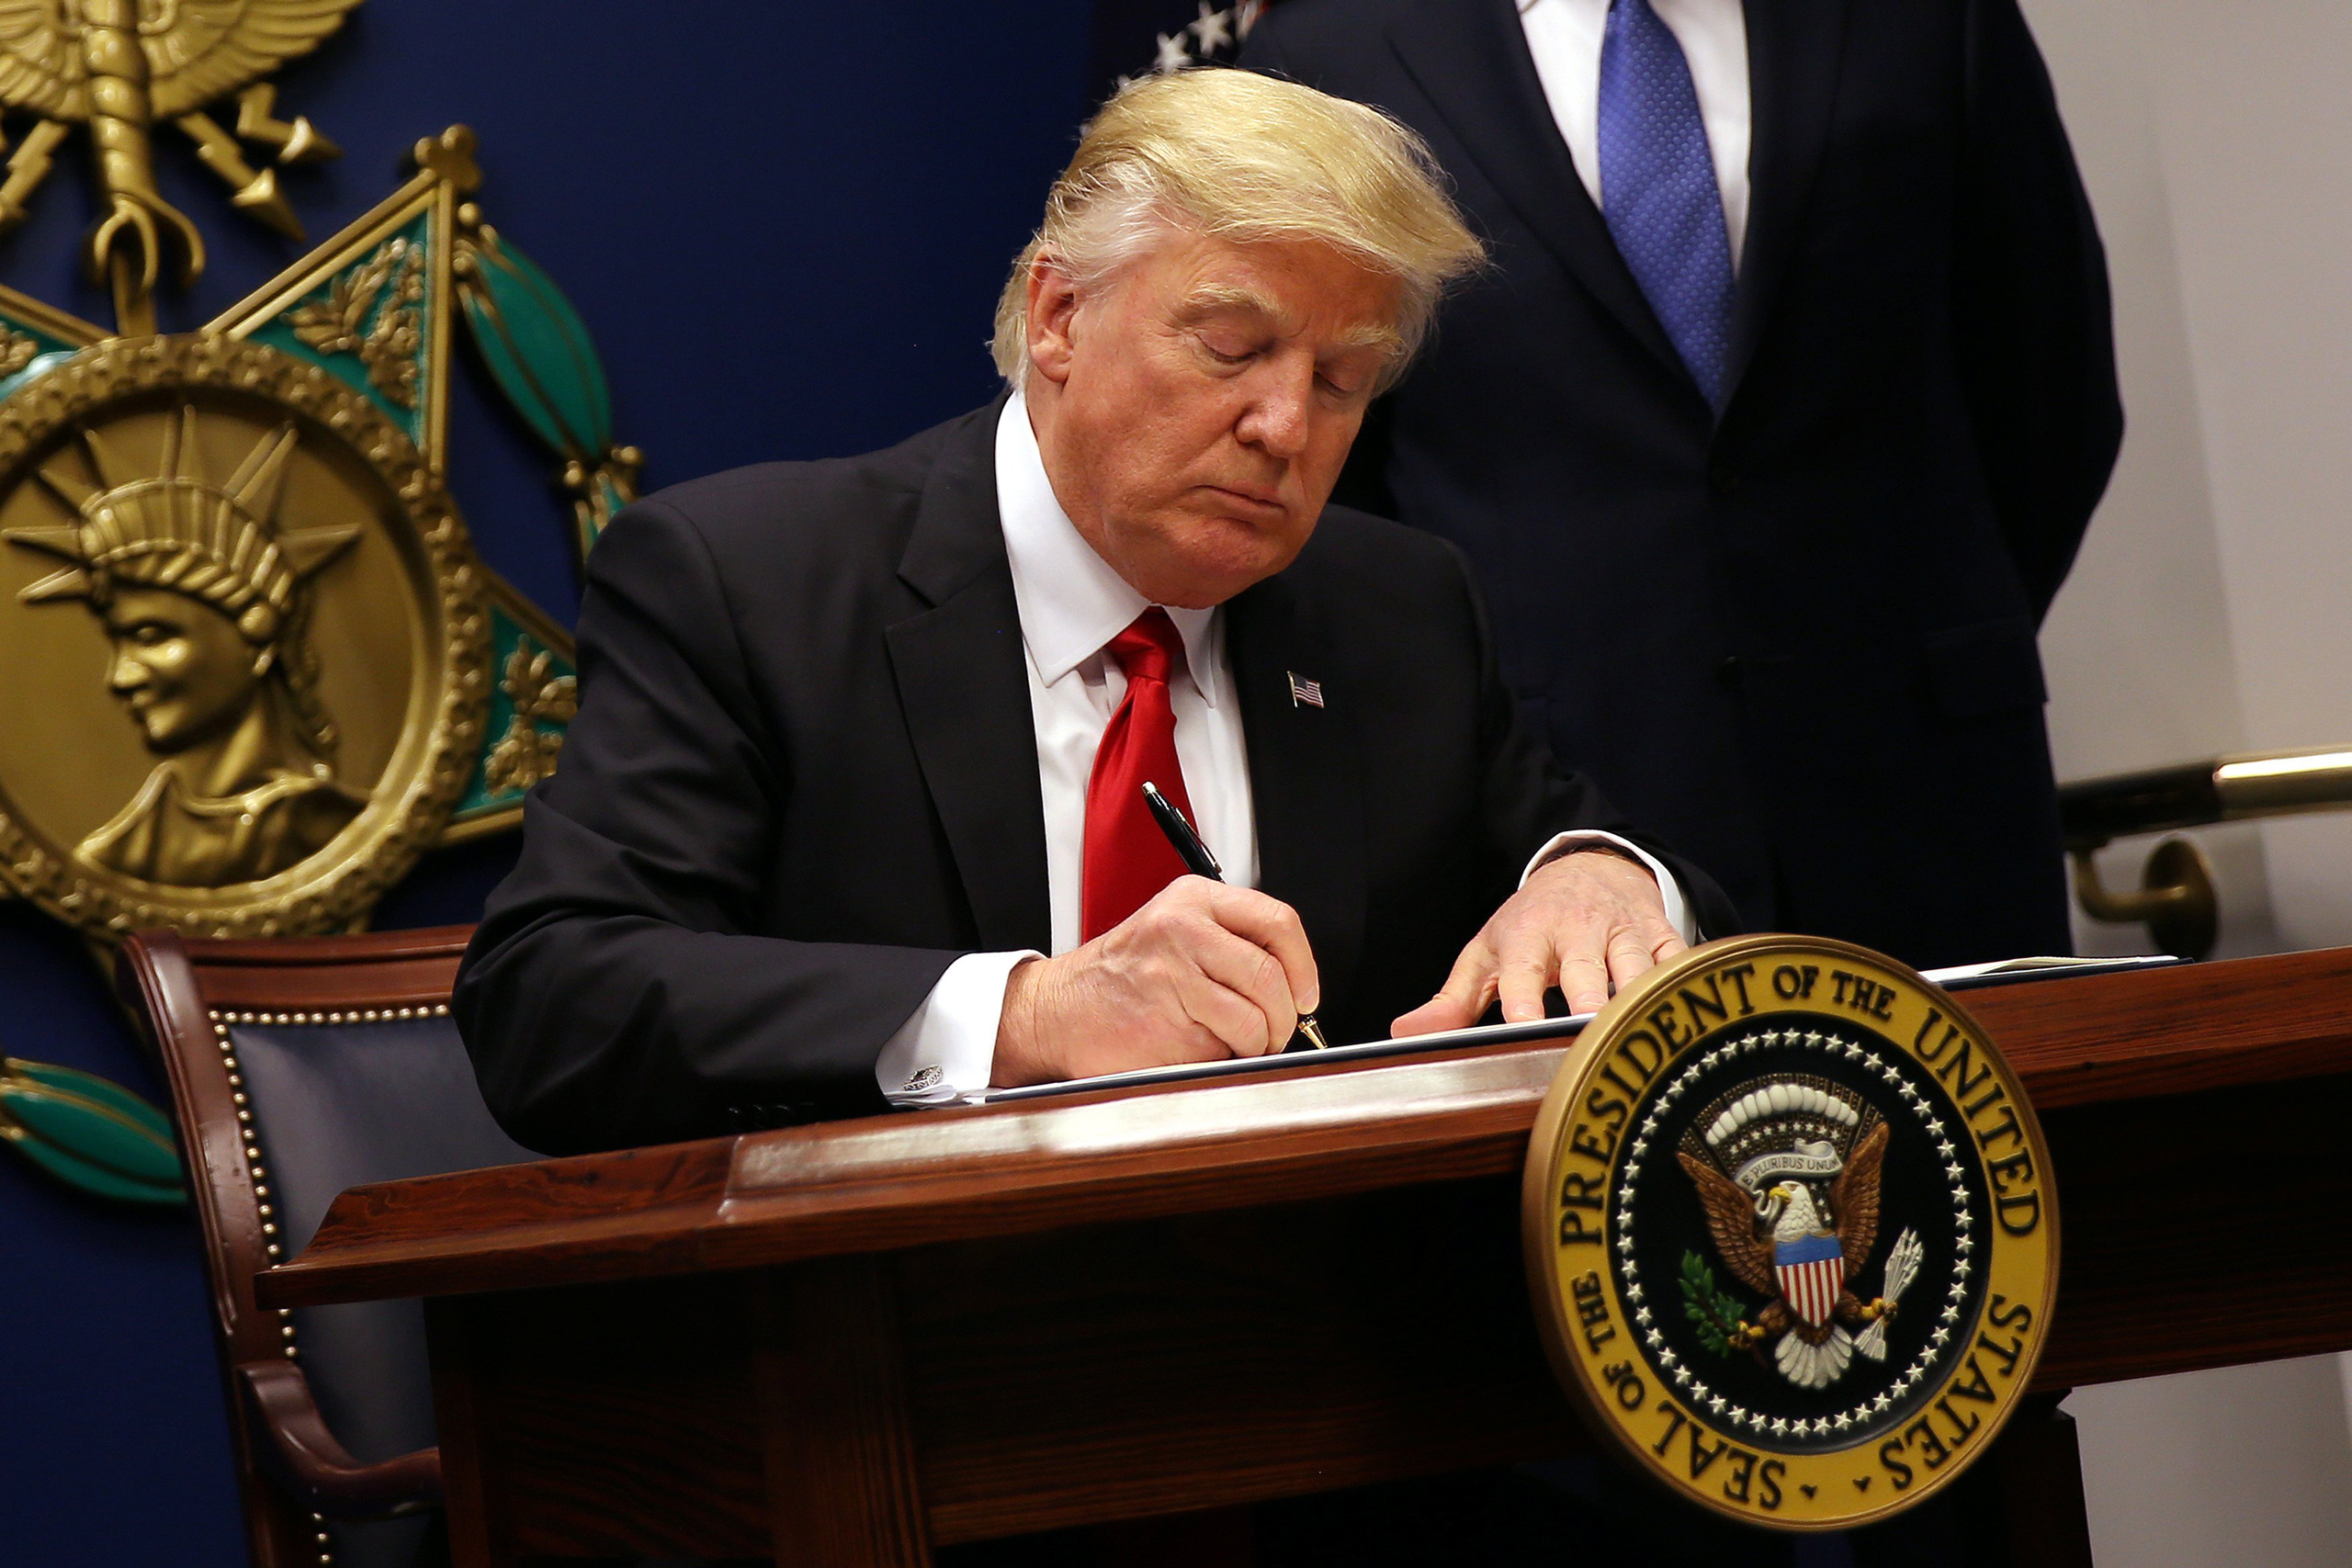 U.S. President Donald Trump signs an executive order to impose tighter vetting of travelers entering the United States, at the Pentagon in Washington